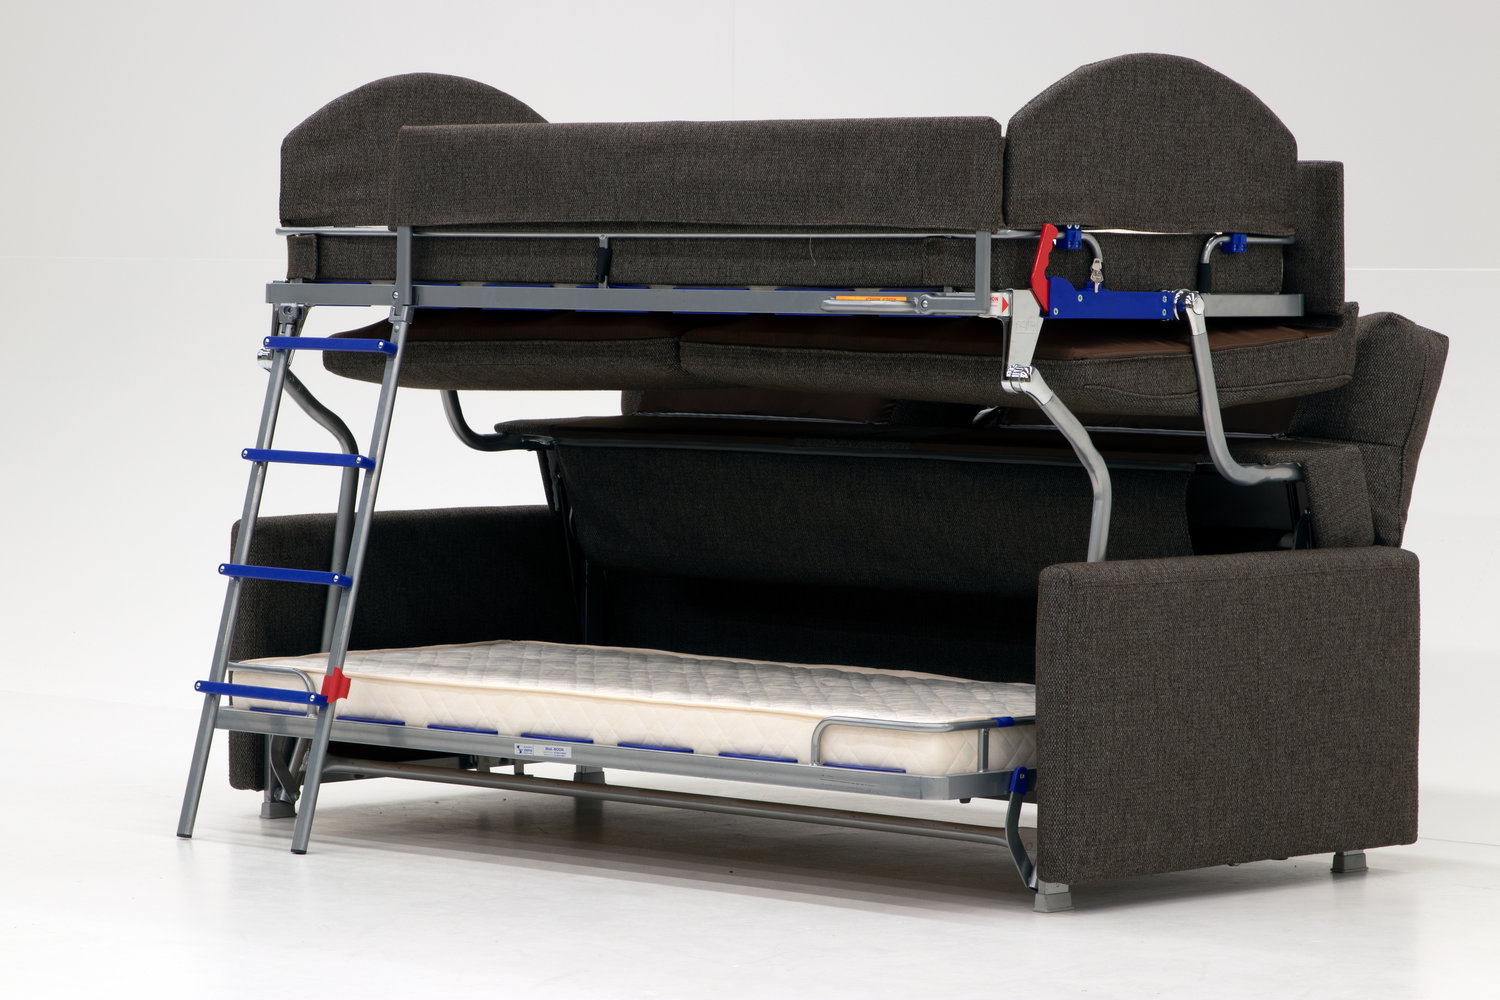 Elevate Bunk Sofa Bed M Collection Home, Sleeper Bunk Bed